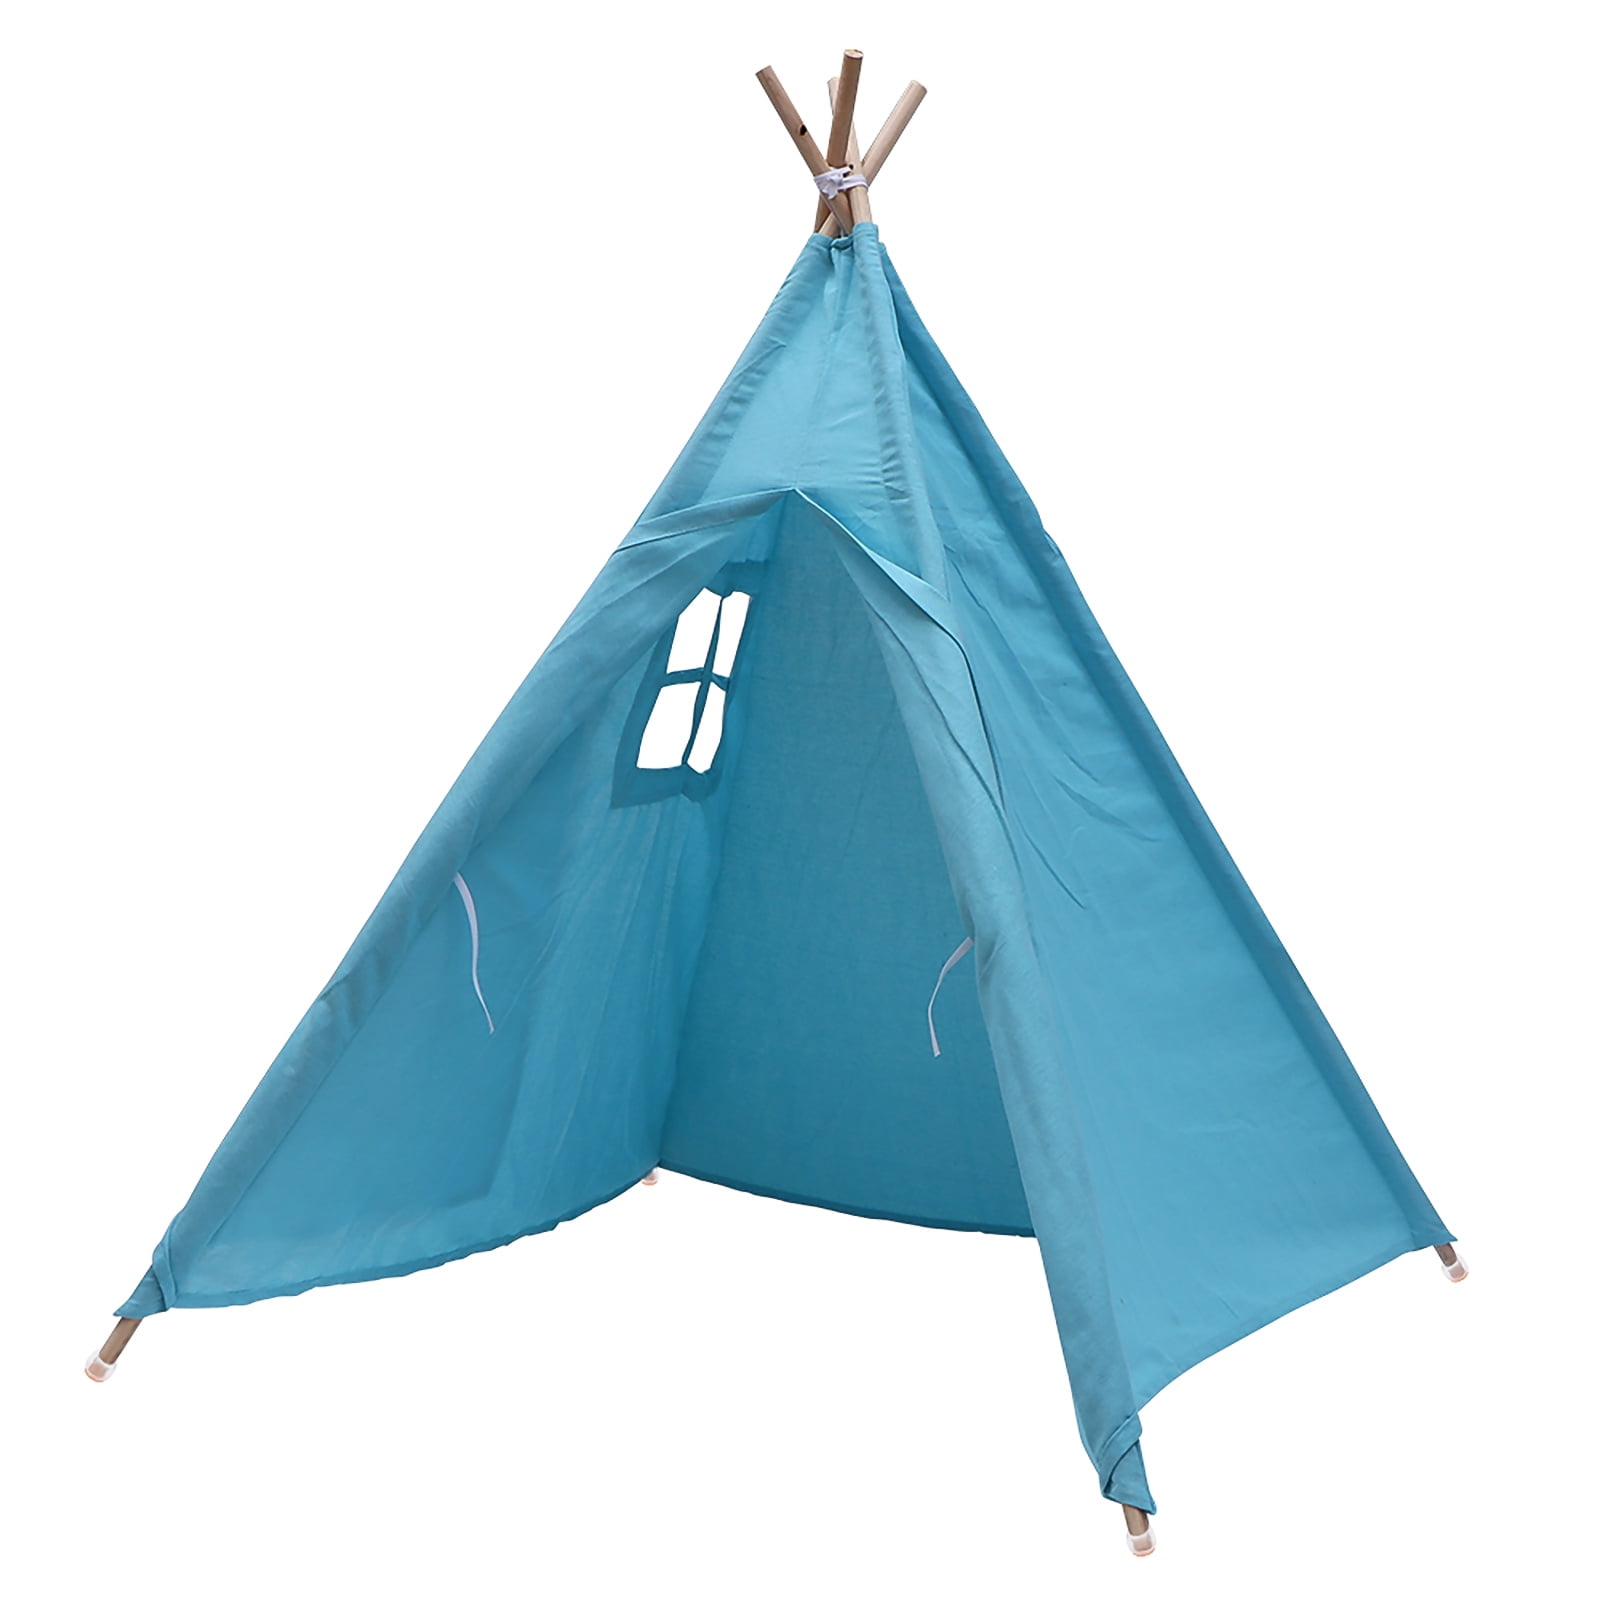 Large Cotton Canvas Kids Teepee Tent Childrens Wigwam In/Outdoor Play House Gam 